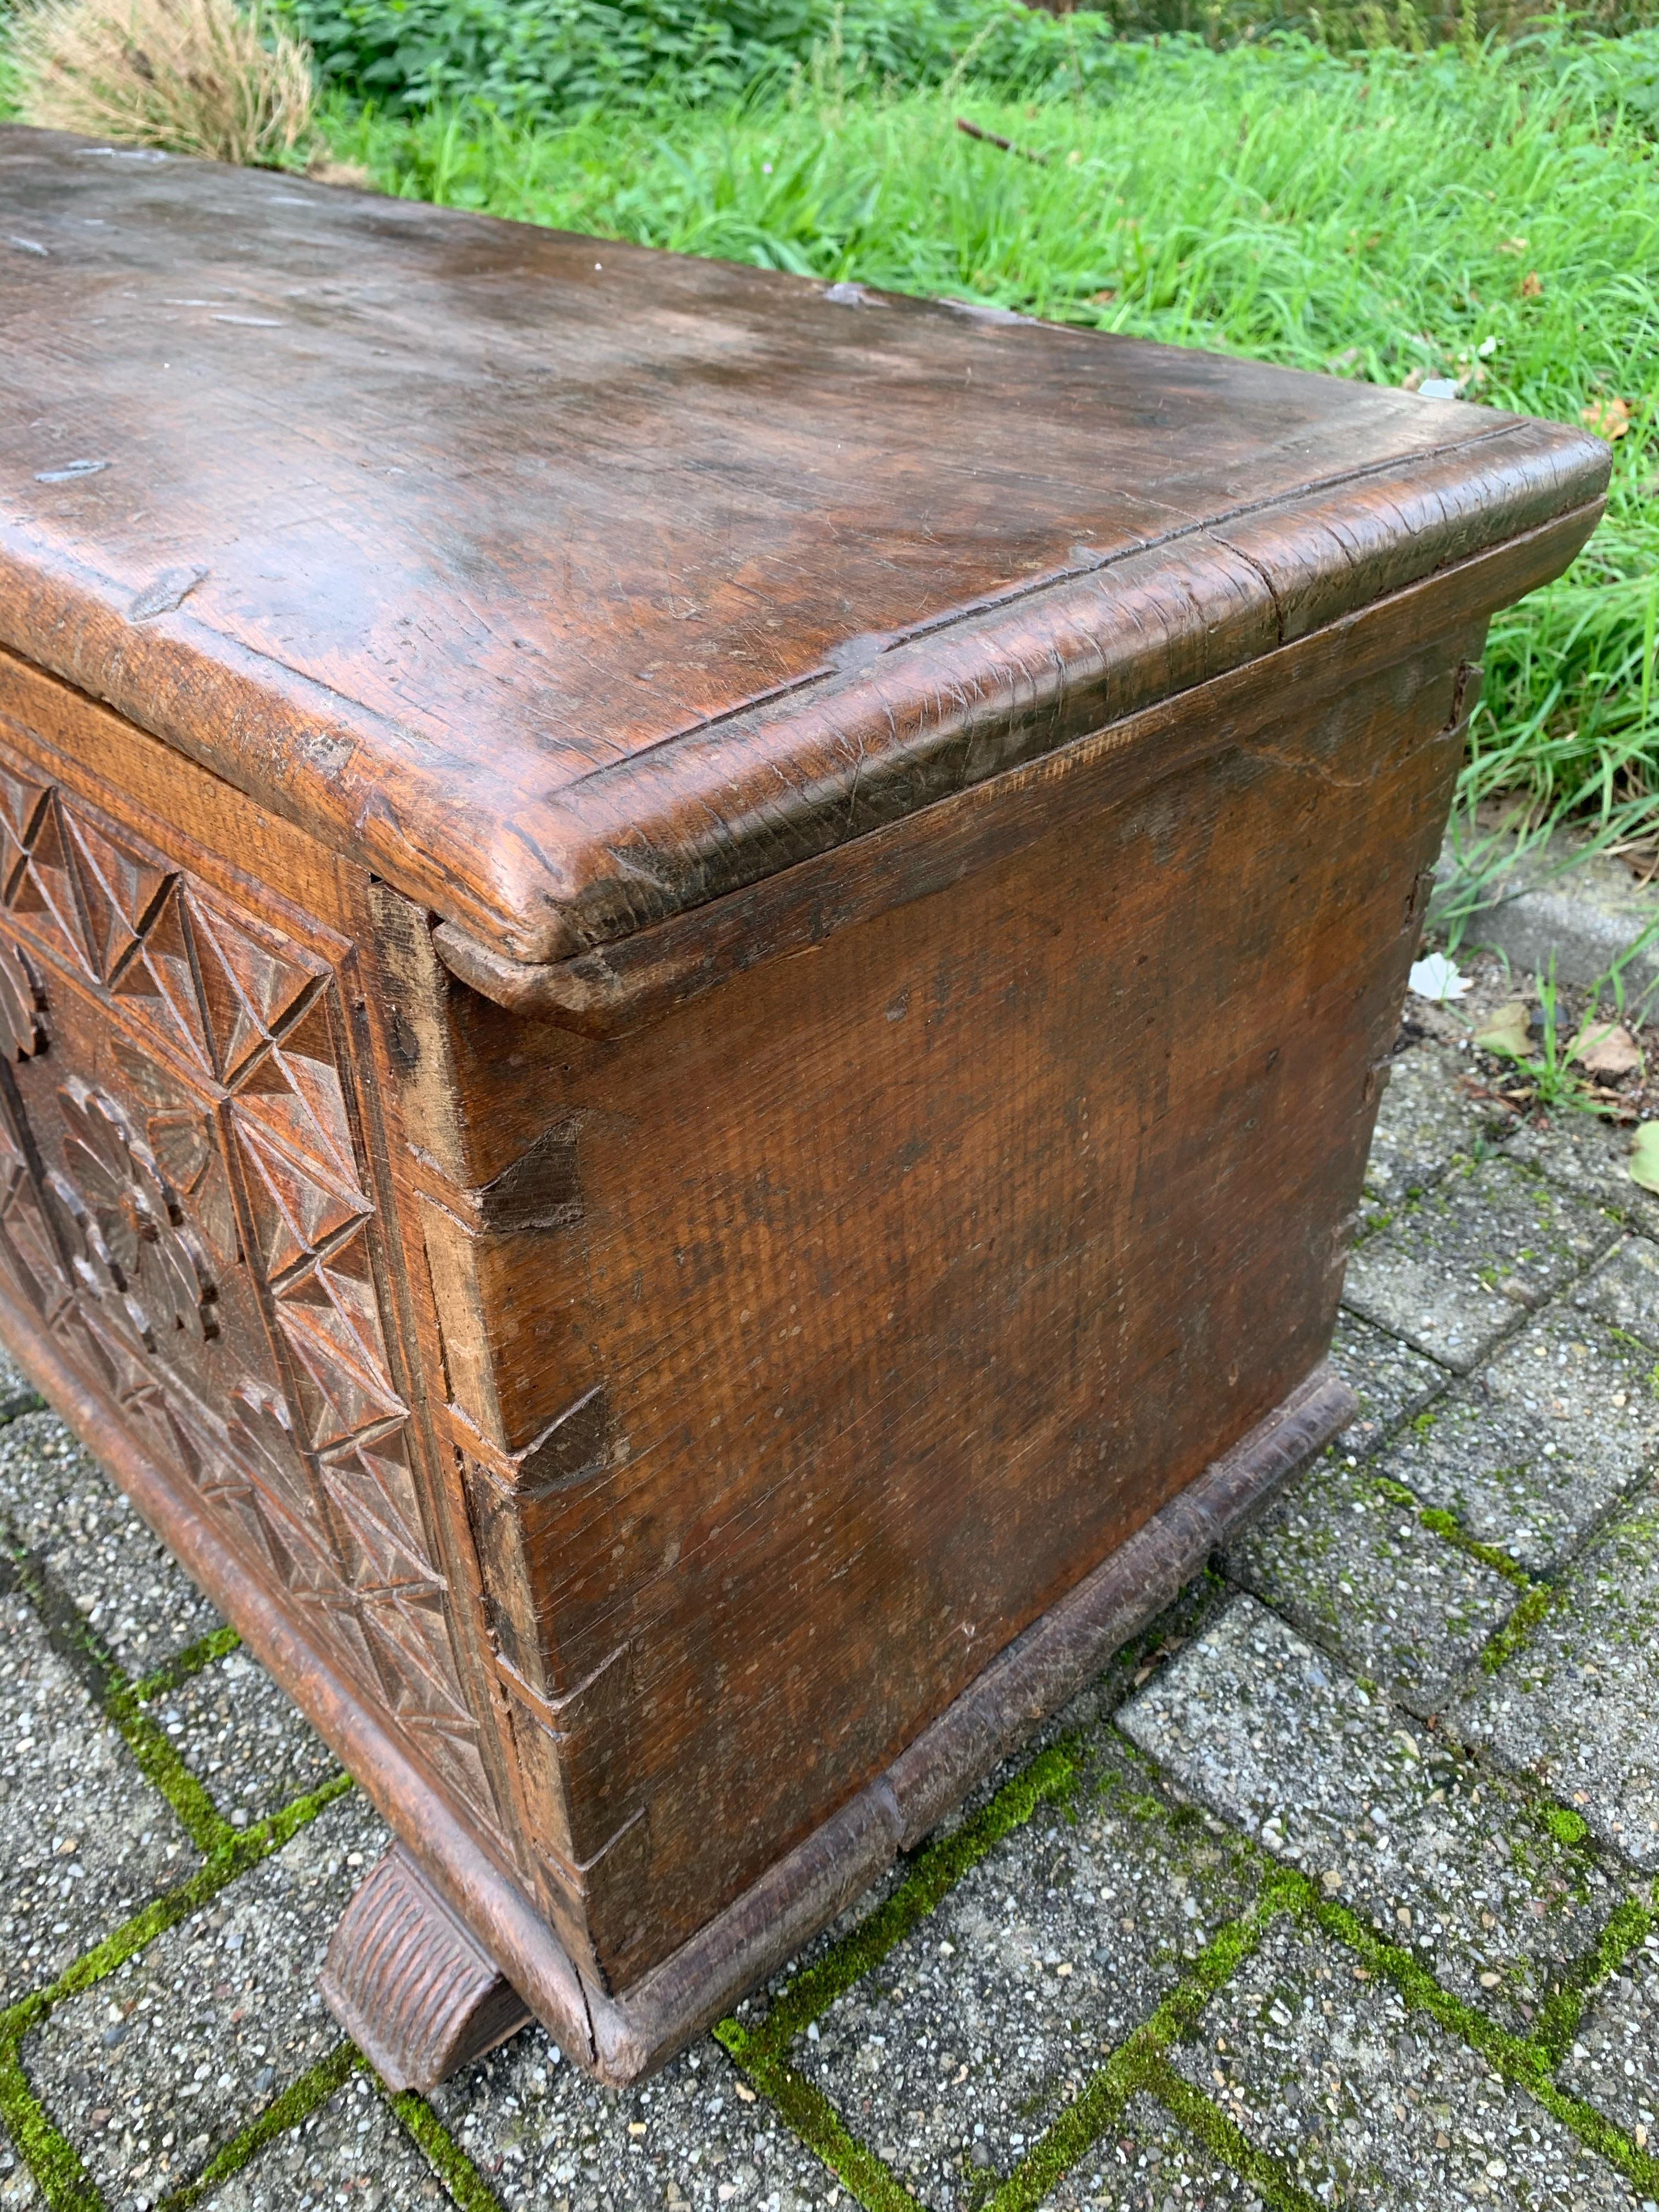 18th Century Stunning Antique, Early 1700s Hand Carved Wooden Spanish Blanket Chest / Trunk